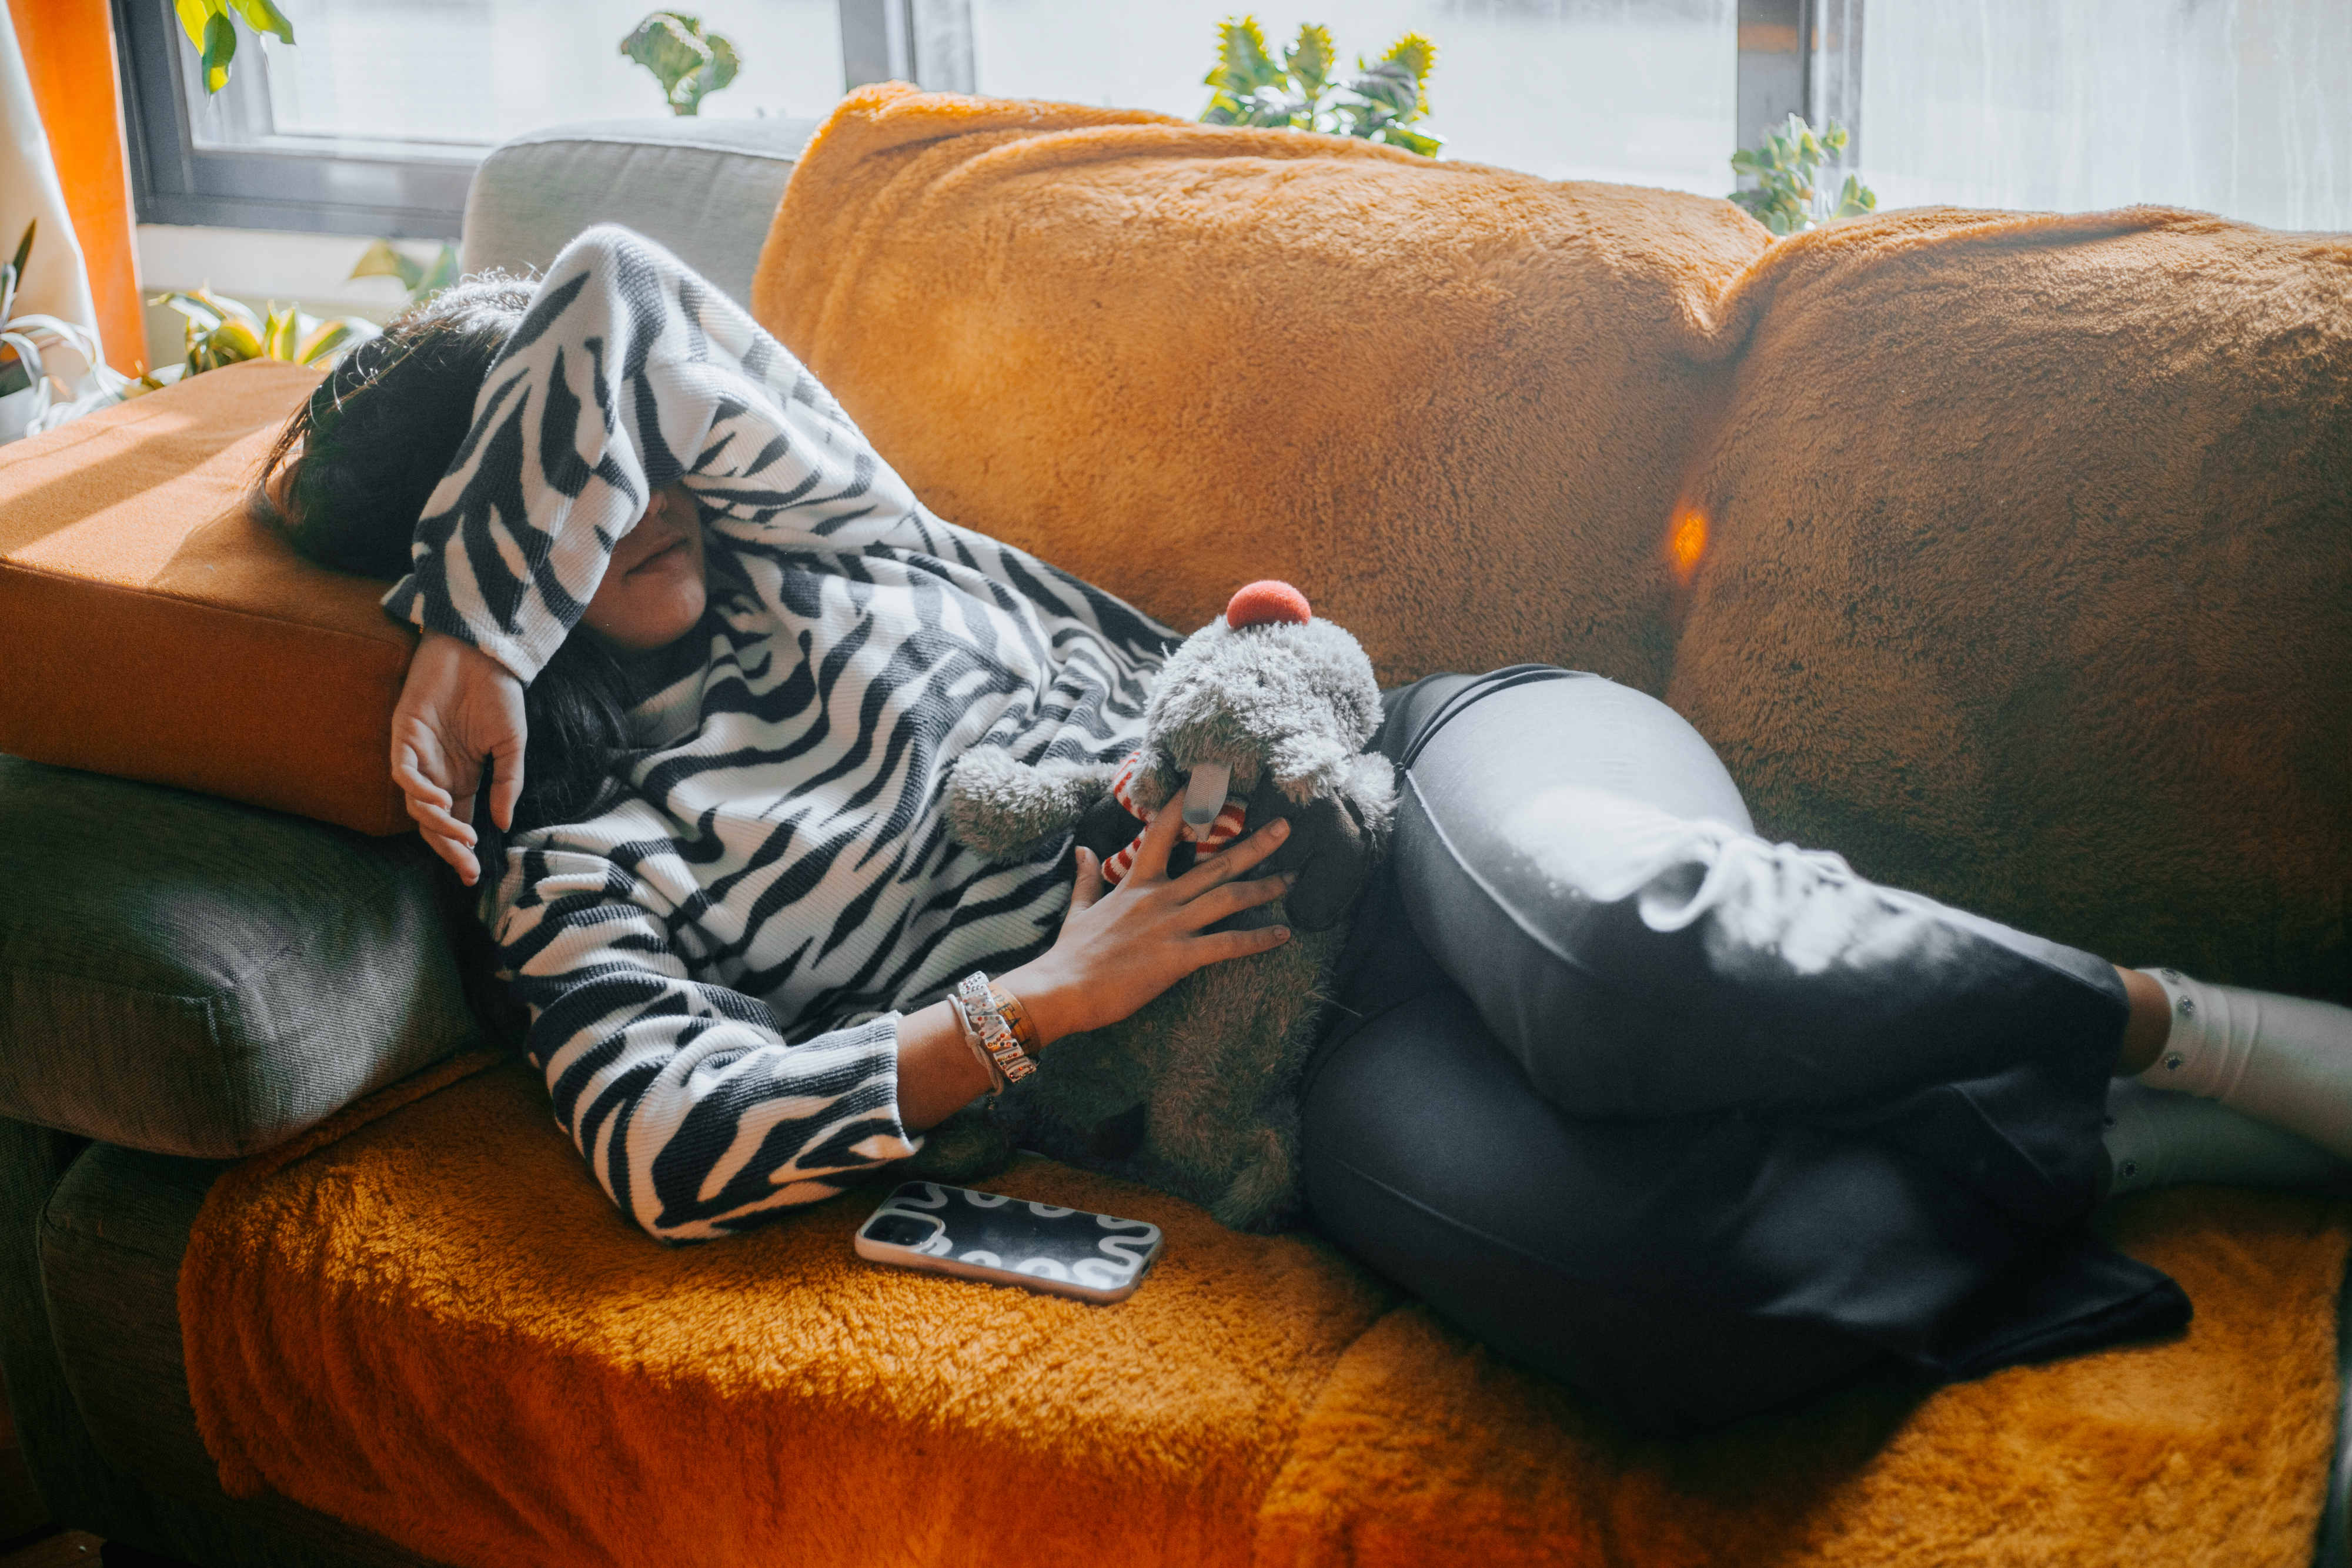 Person lying on a couch with their arm covering their face, wearing a zebra-patterned sweater, holding a stuffed toy, and a phone resting nearby